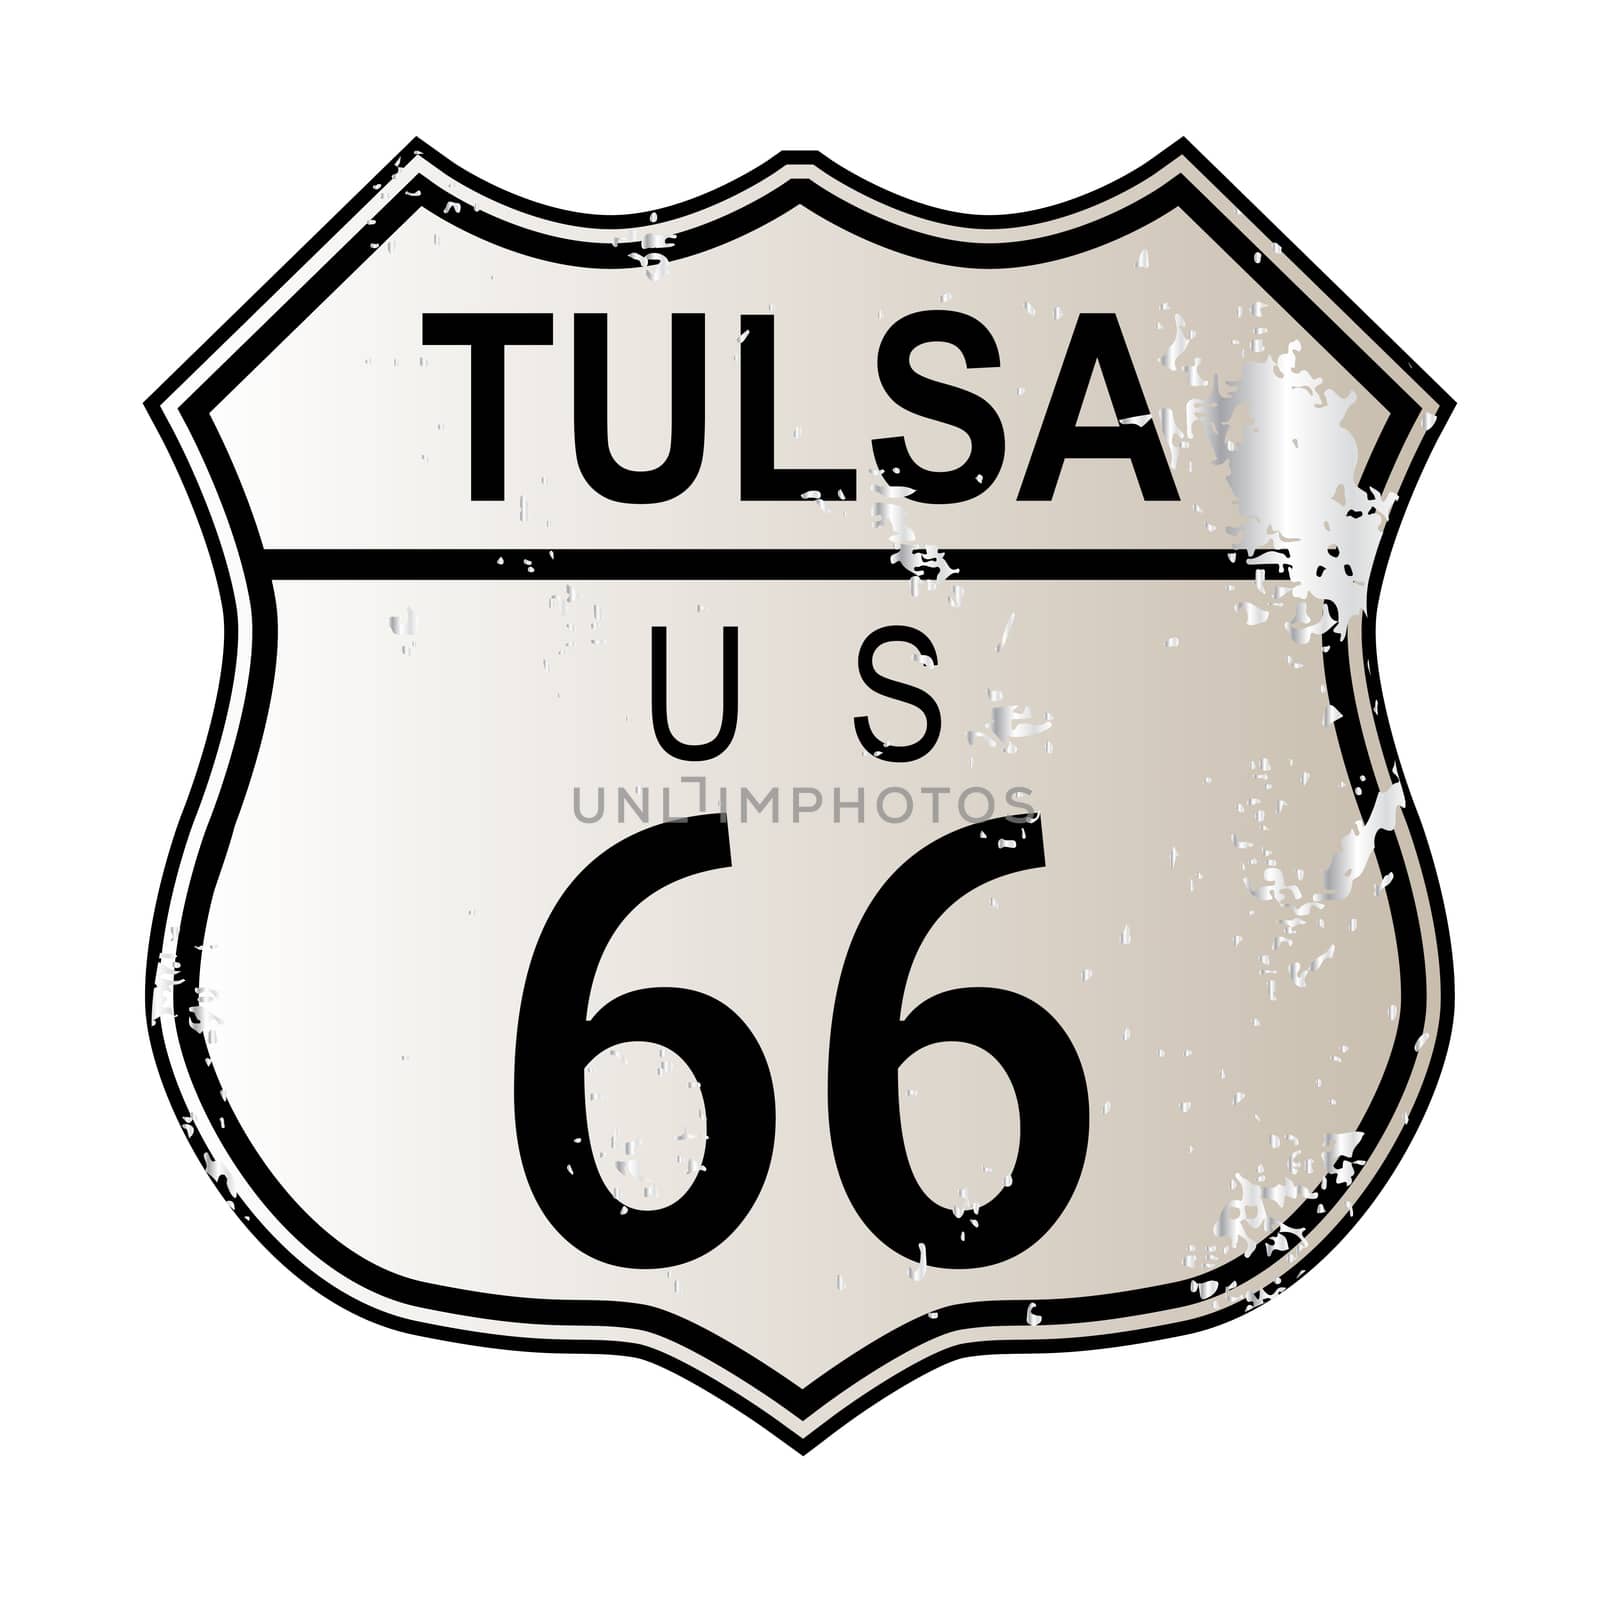 Tulsa Route 66 Highway Sign by Bigalbaloo